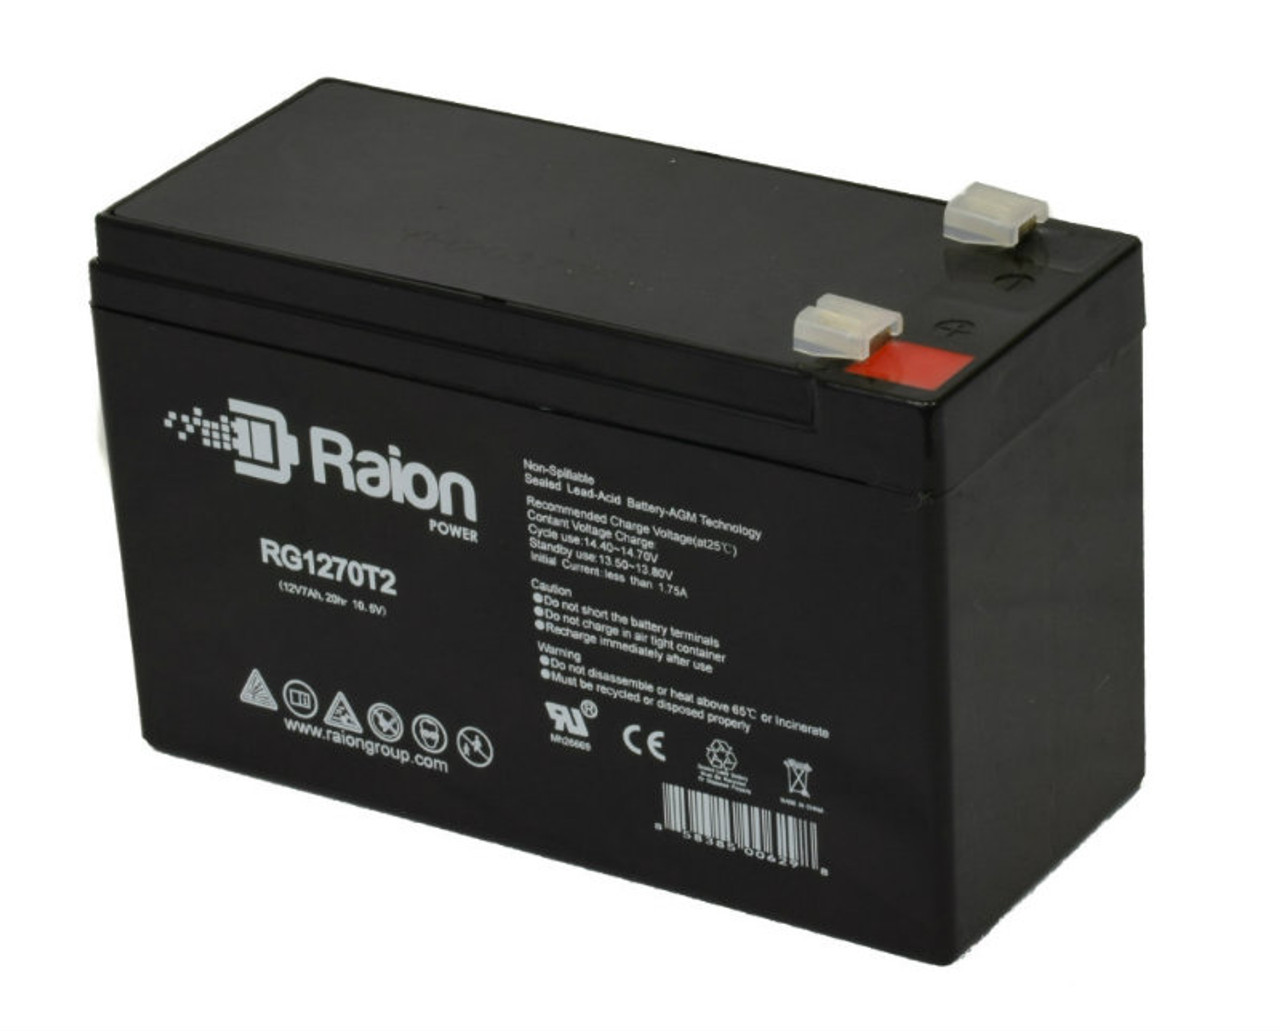 Raion Power RG1270T1 12V 7Ah Non-Spillable Replacement Battery for Zeus PC7-12F1